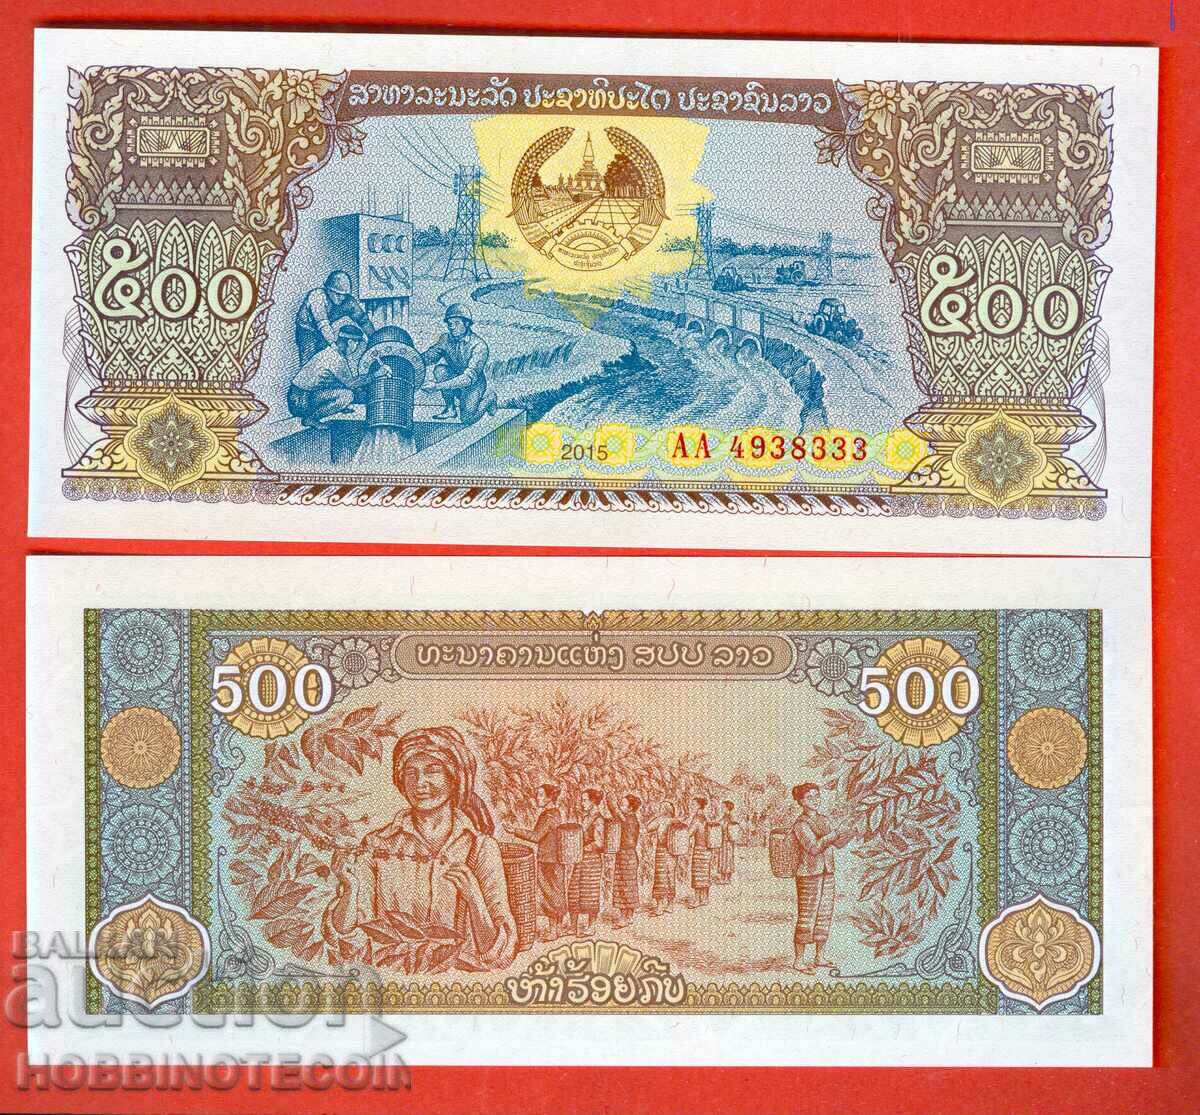 LAOS LAO 500 Kip issue issue 2015 NEW UNC